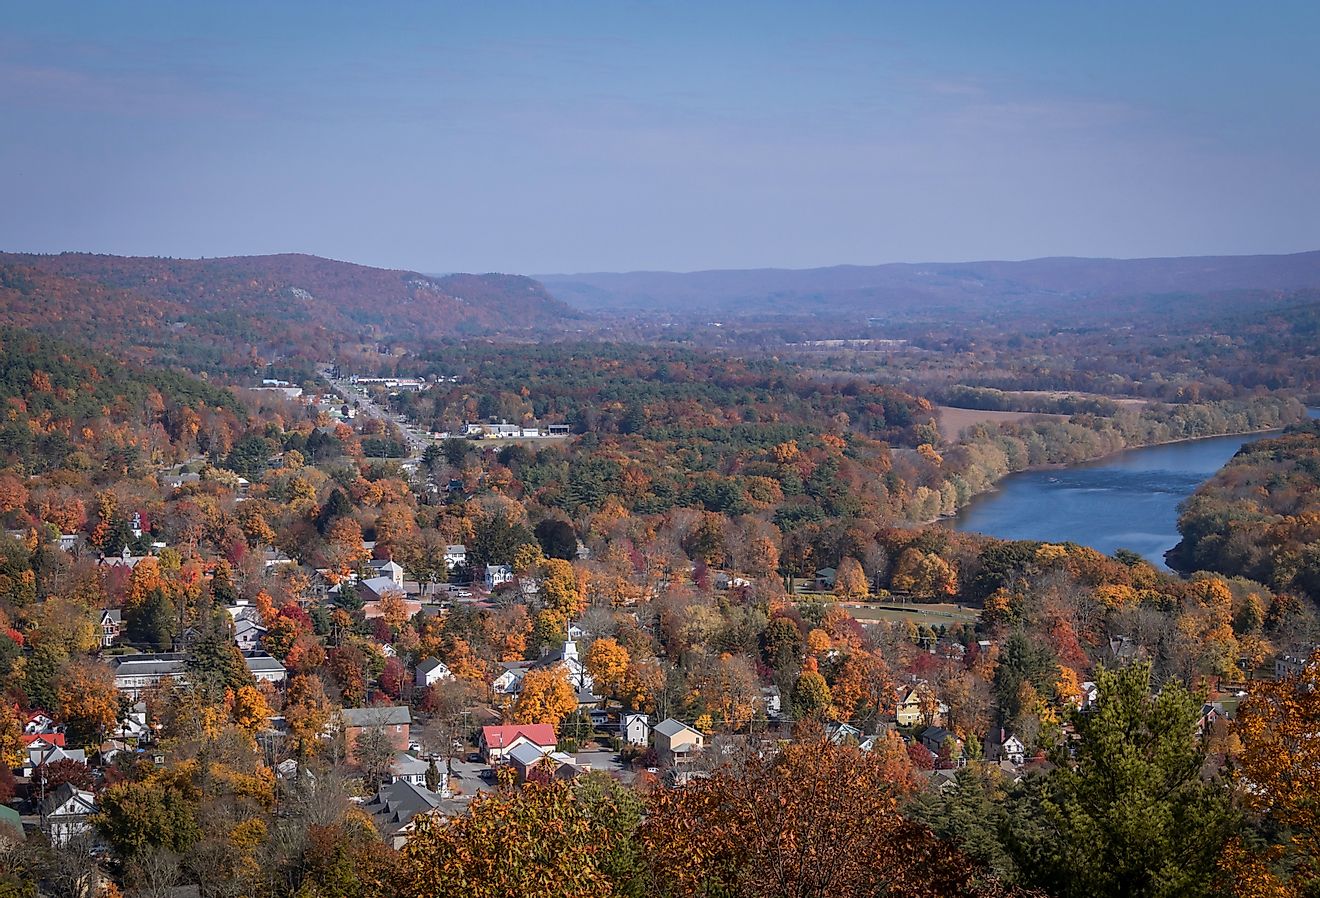 Aerial view of Milford, Pennsylvania, and the Delaware River from a scenic overlook on a sunny fall day.